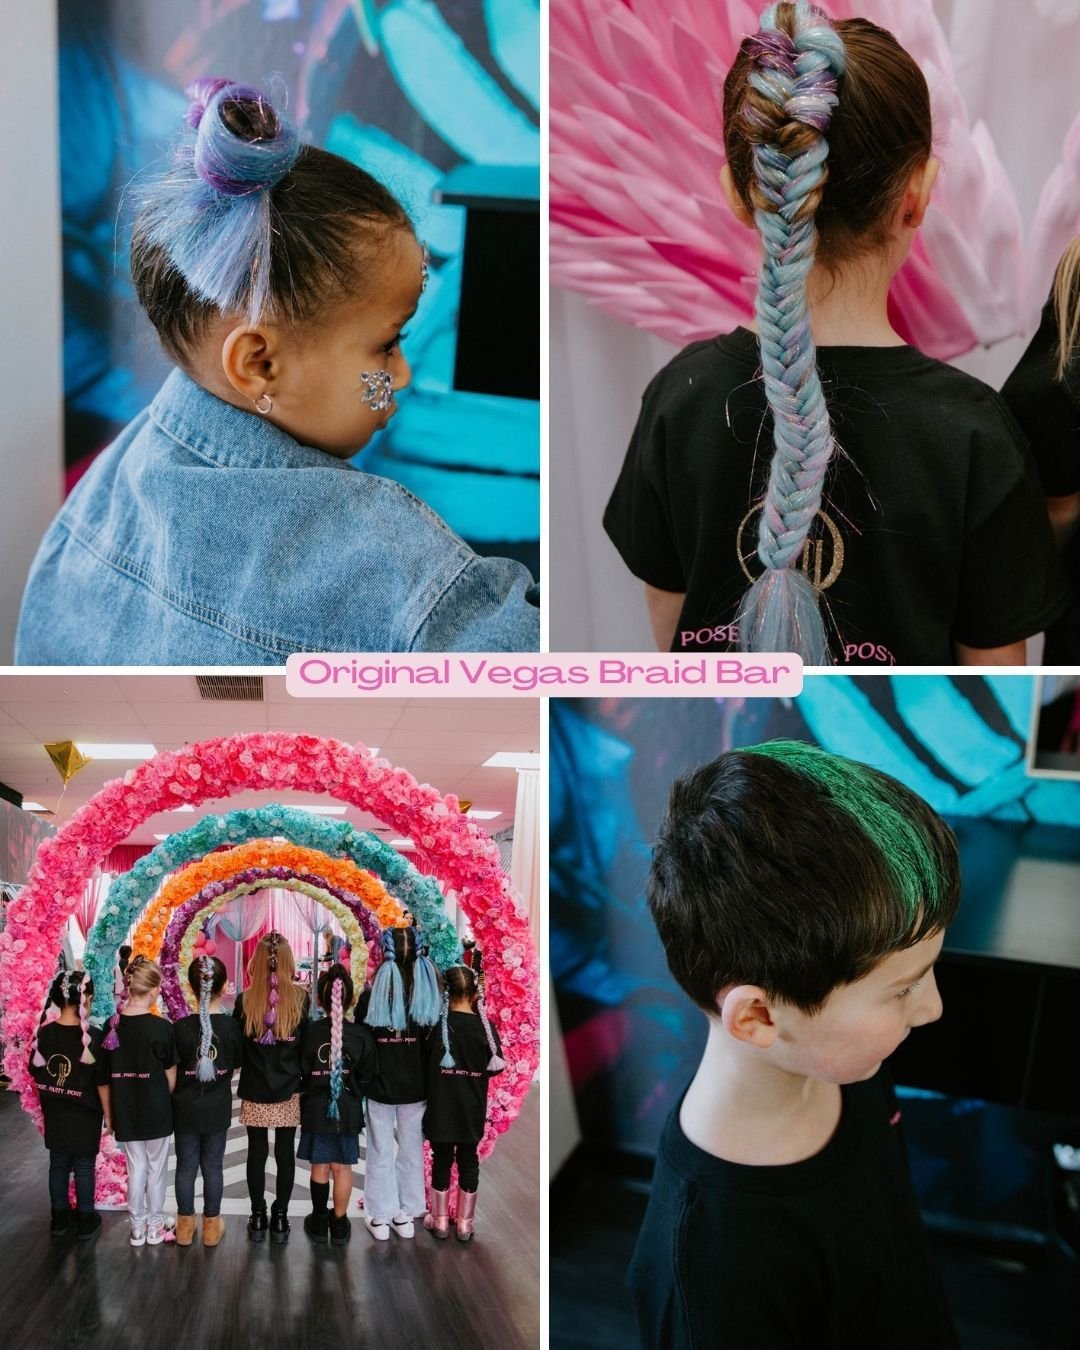 Did you hear? We were the very FIRST mobile braid bar to hit up Las Vegas! 💁&zwj;♀️ We're the OGs in the game, catering to all your festival braid dreams, adorable kiddo braids, and yep, even the boys! 😎 Got a bash coming up? We're your go-to glam 